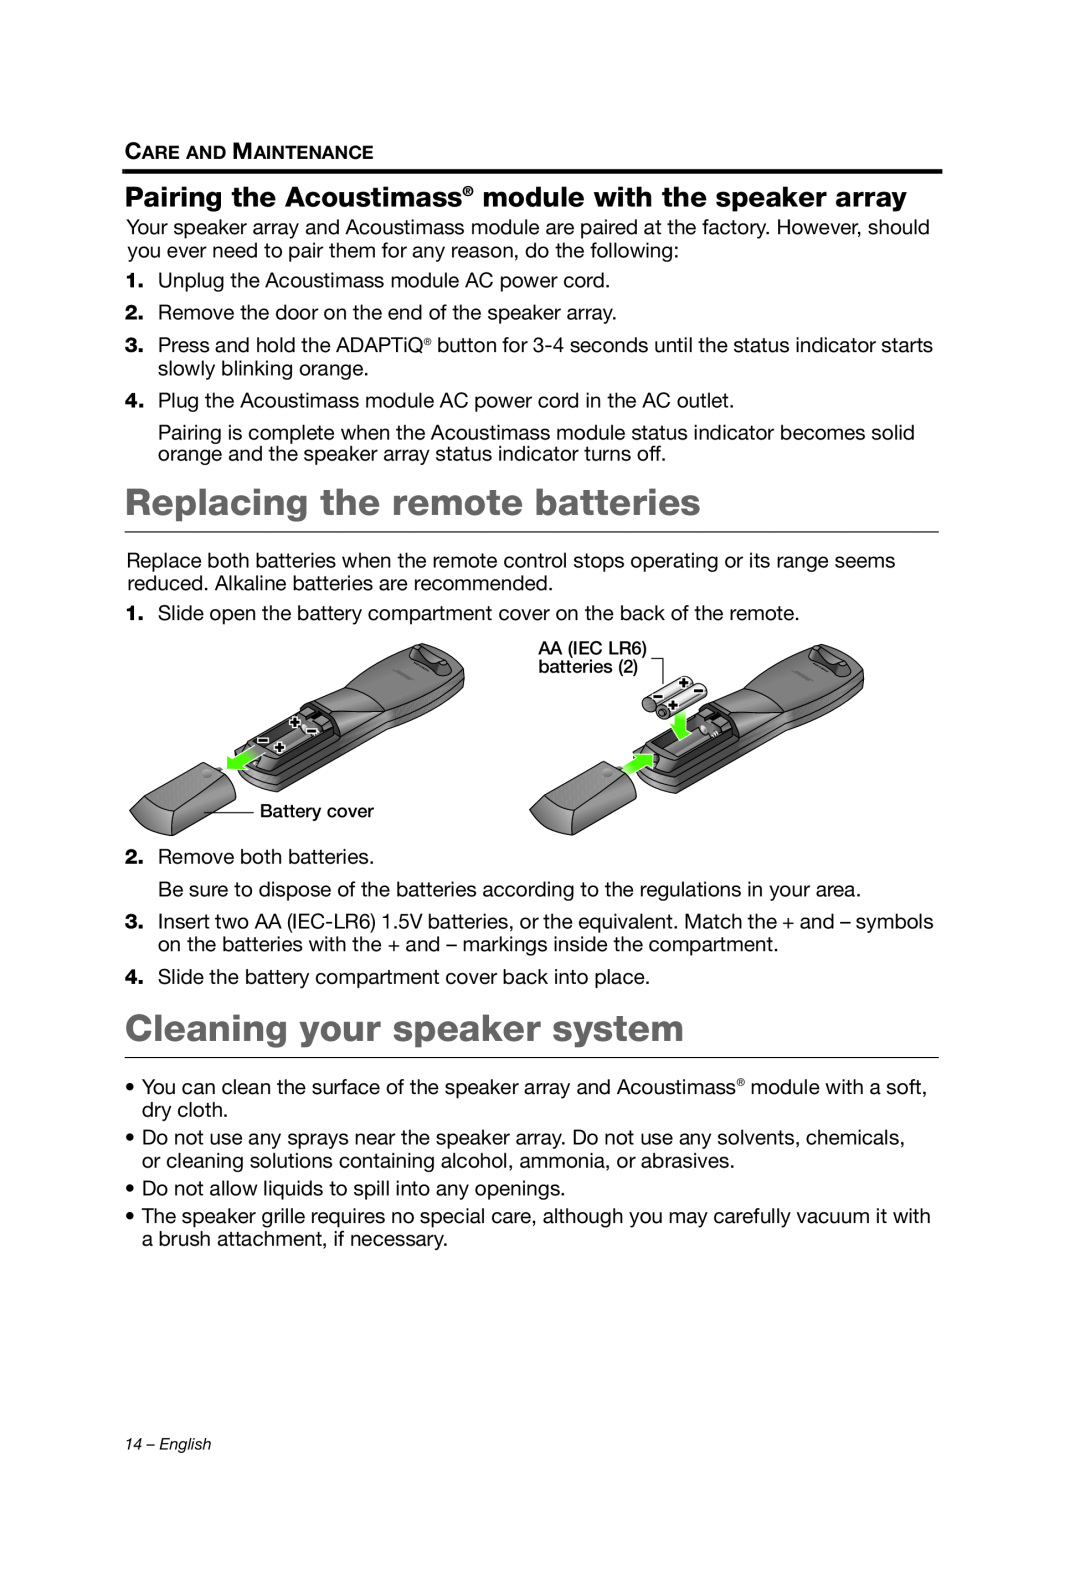 Bose 1 SR manual Replacing the remote batteries, Cleaning your speaker system 